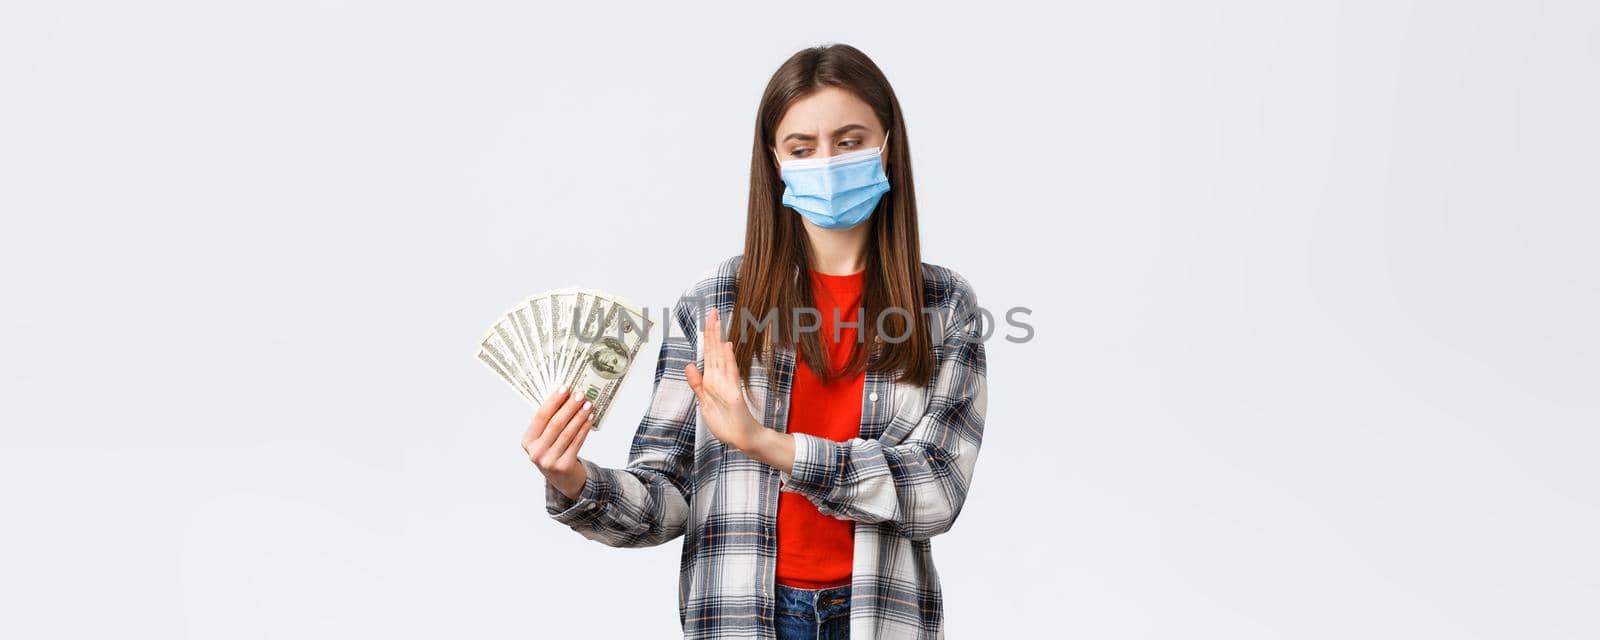 Money transfer, investment, covid-19 pandemic and working from home concept. Displeased girl in medical mask rejecting taking cash as bribe, show stop sign to dollars and frowning bothered by Benzoix